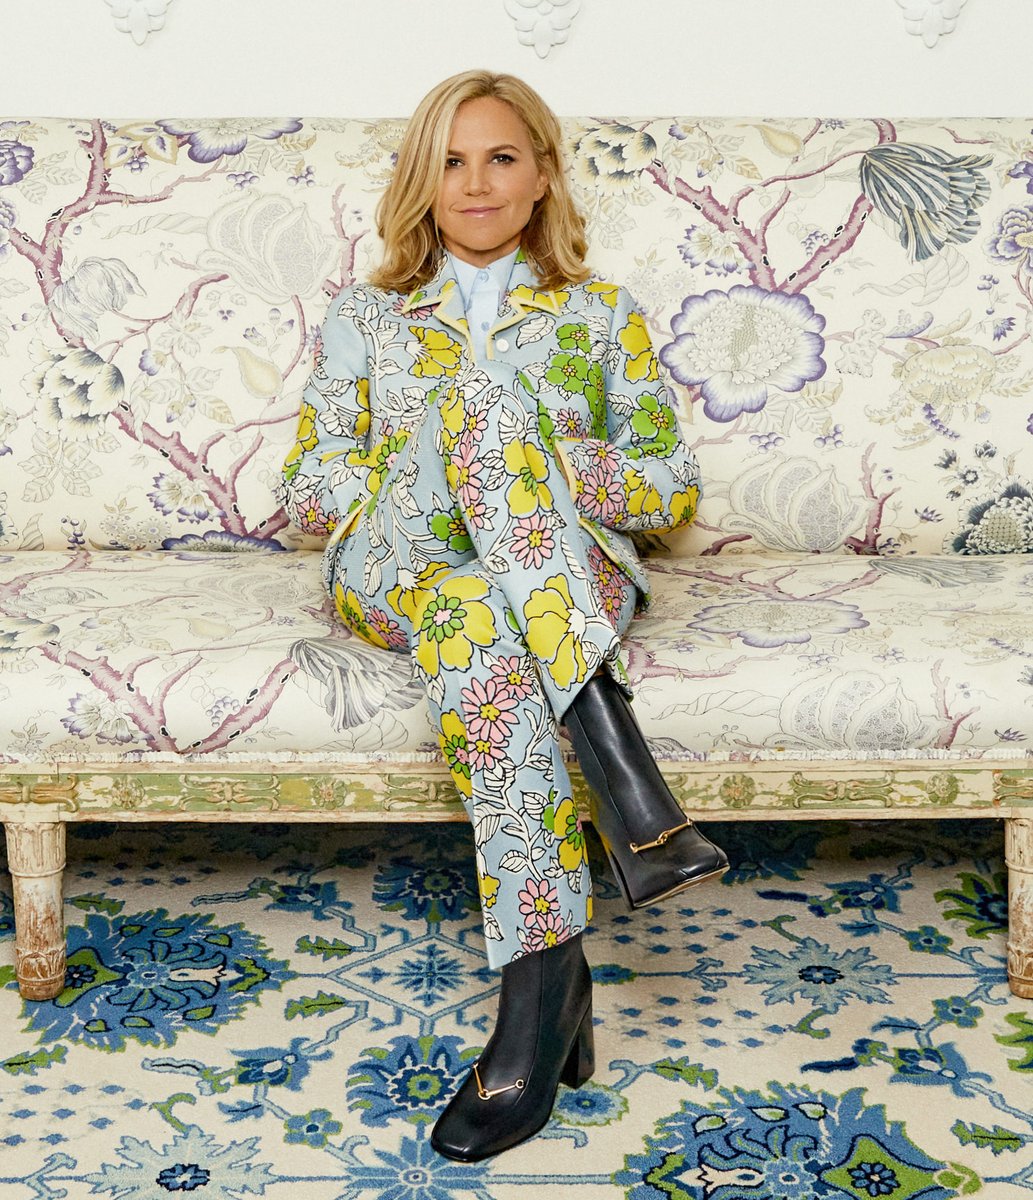 Tory Burch Wallpapers